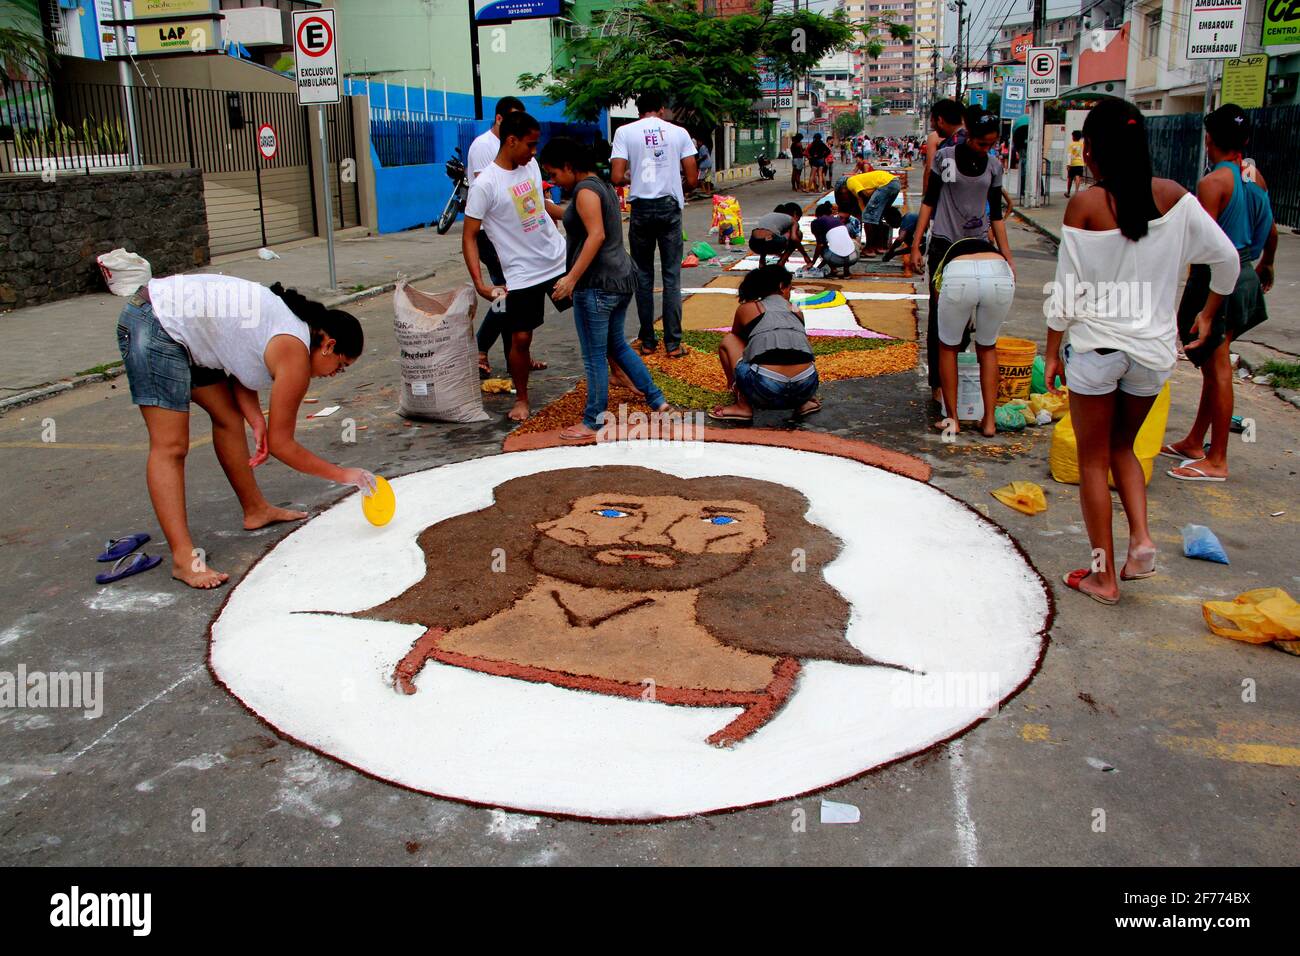 Itabuna, Bahia / Brazil - June 7, 2012: People are seen making traditional tapes during the Corpus Crist holiday festivities in Itabuna. *** Local Cap Stock Photo